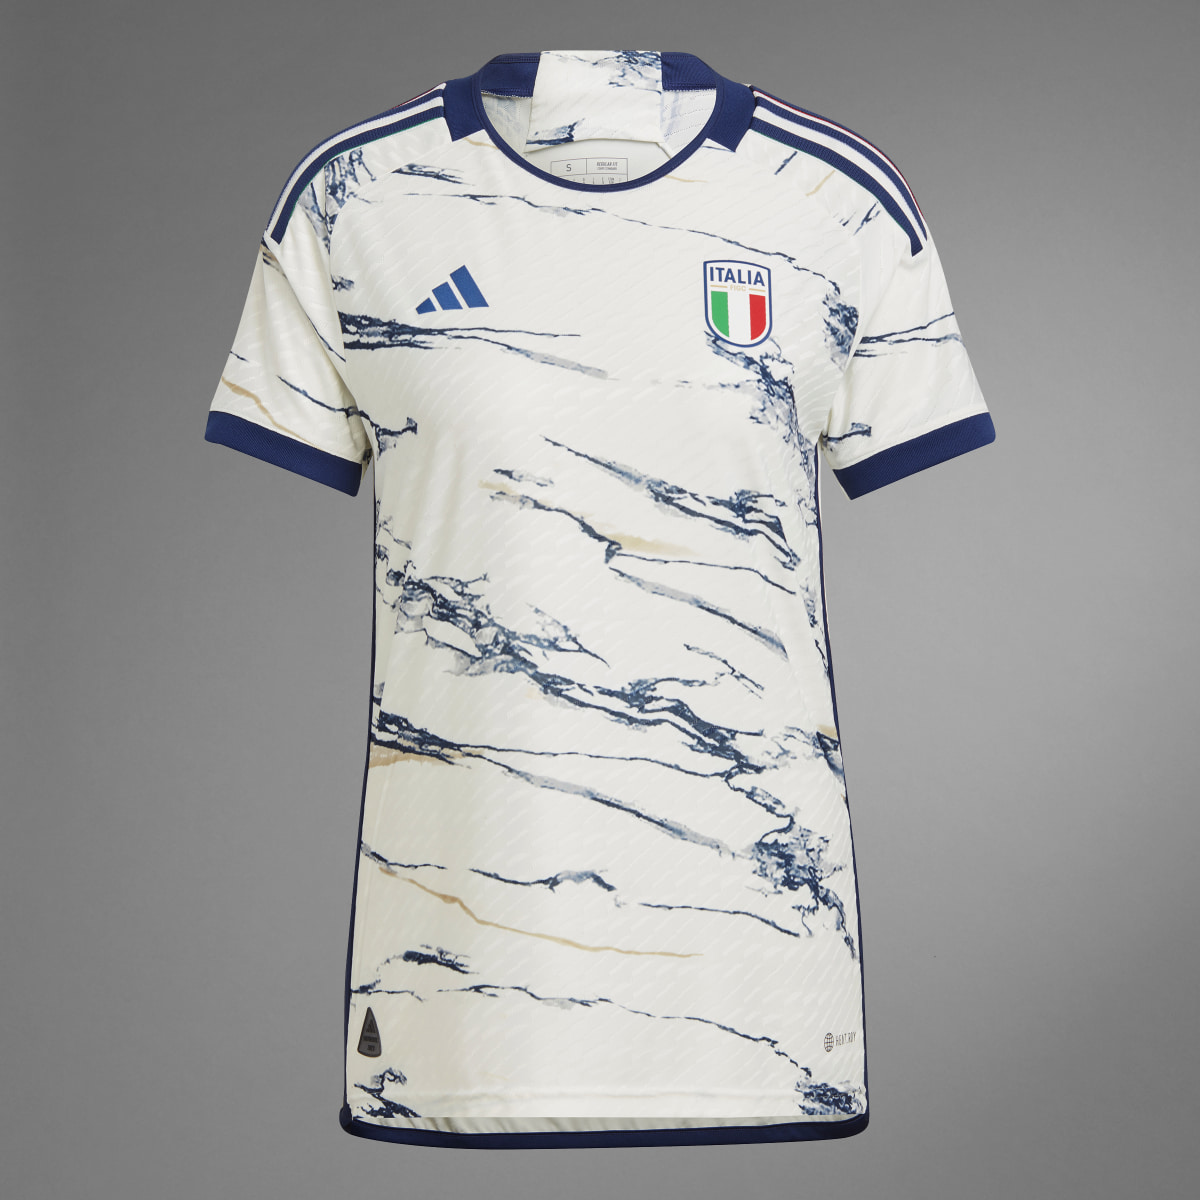 Adidas Italy Women's Team 23 Away Authentic Jersey. 12